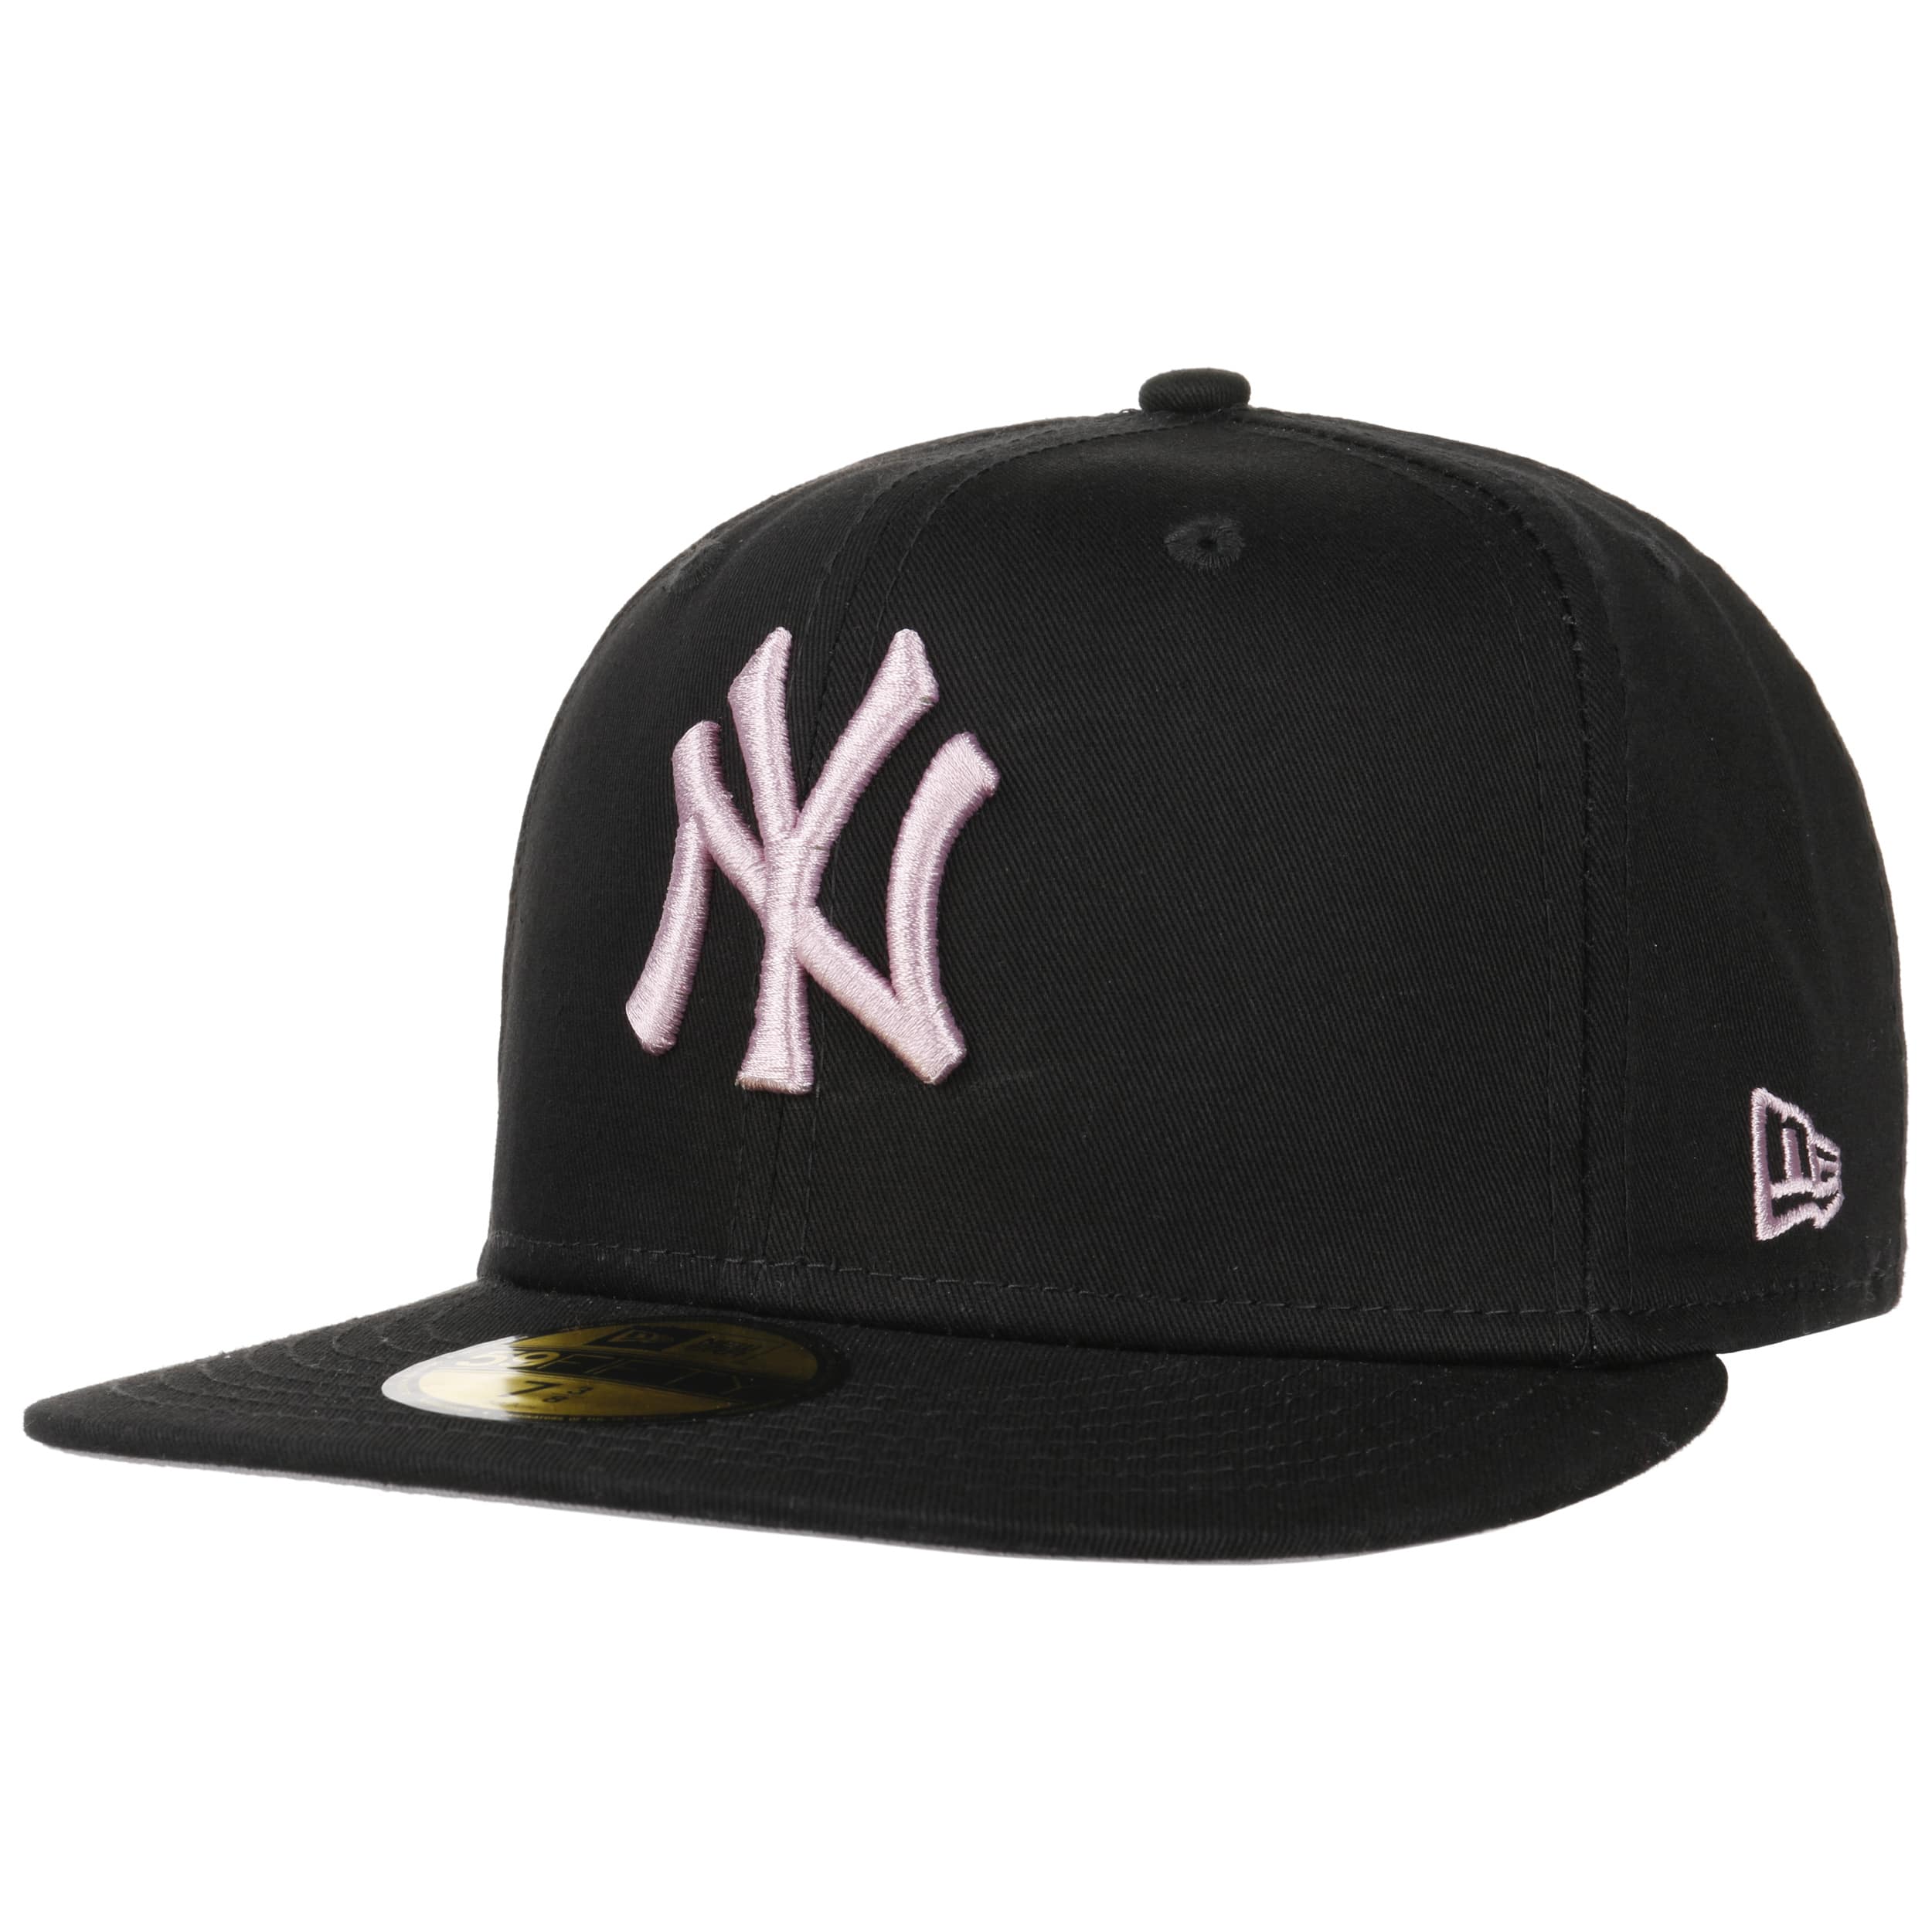 € Era Twotone Cap - New 59Fifty Yankees by 46,95